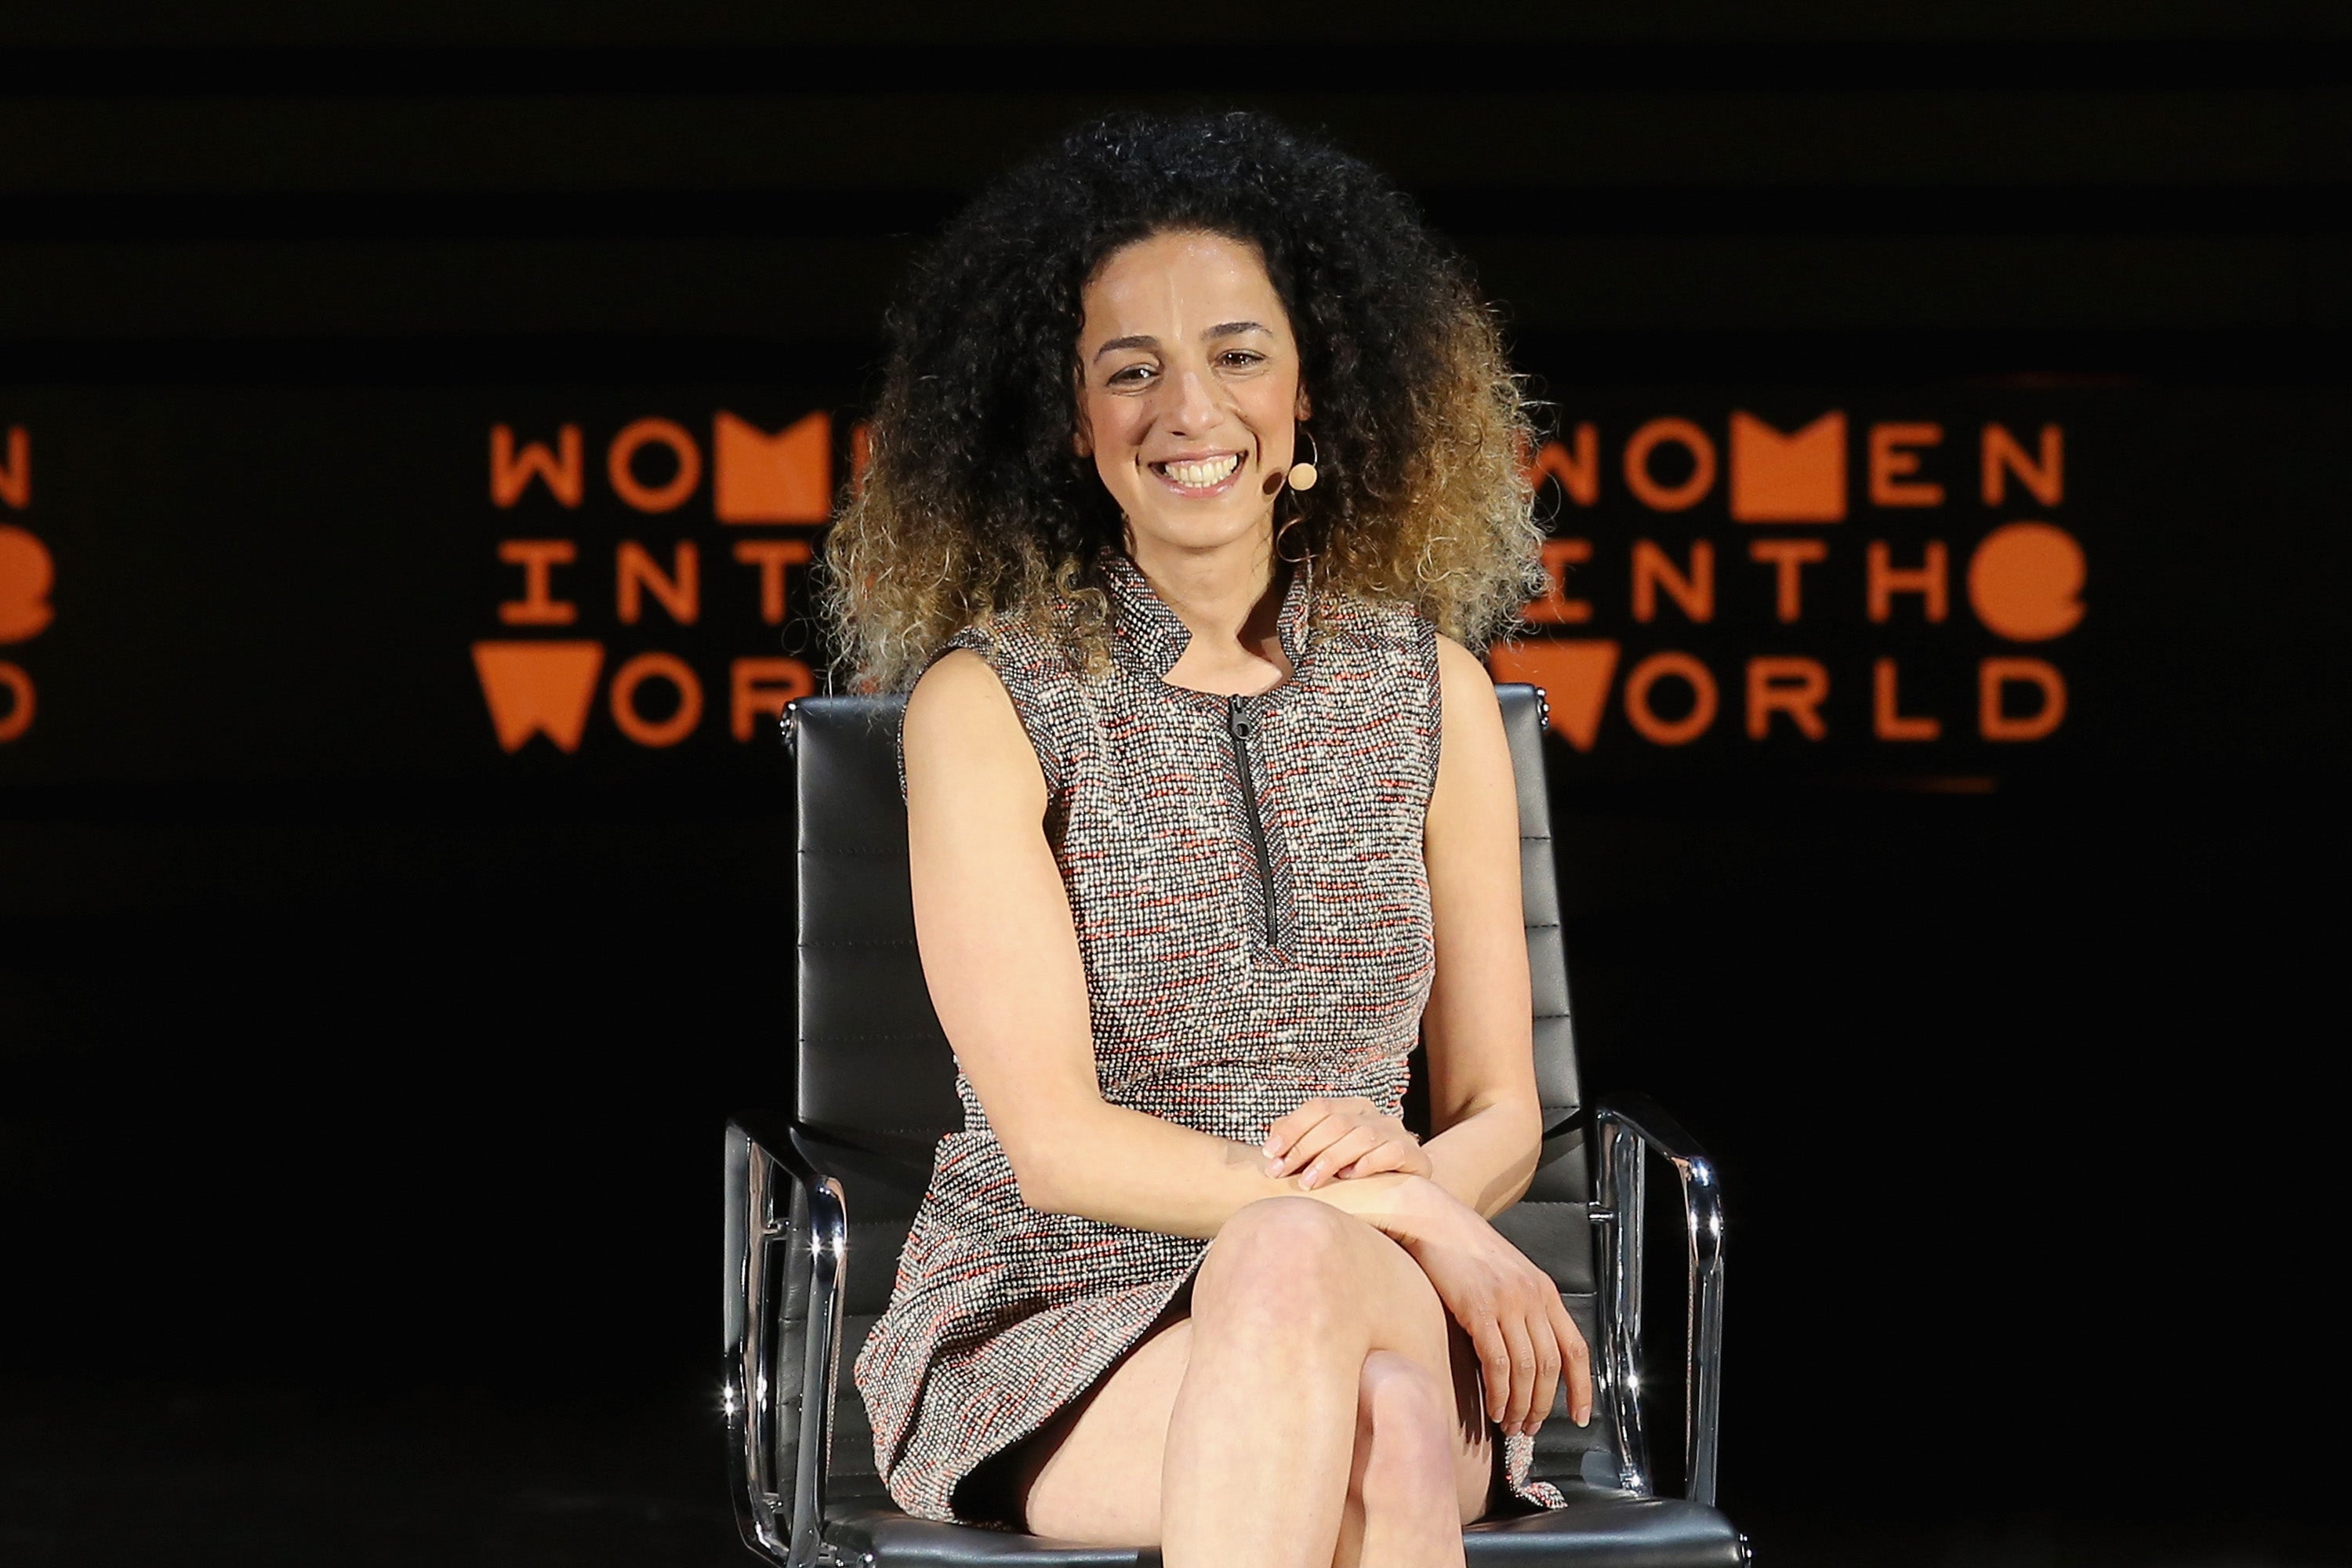 File: Author Masih Alinejad speaks onstage during Tina Brown's 7th Annual Women In The World Summit on 7 April 2016 in New York City